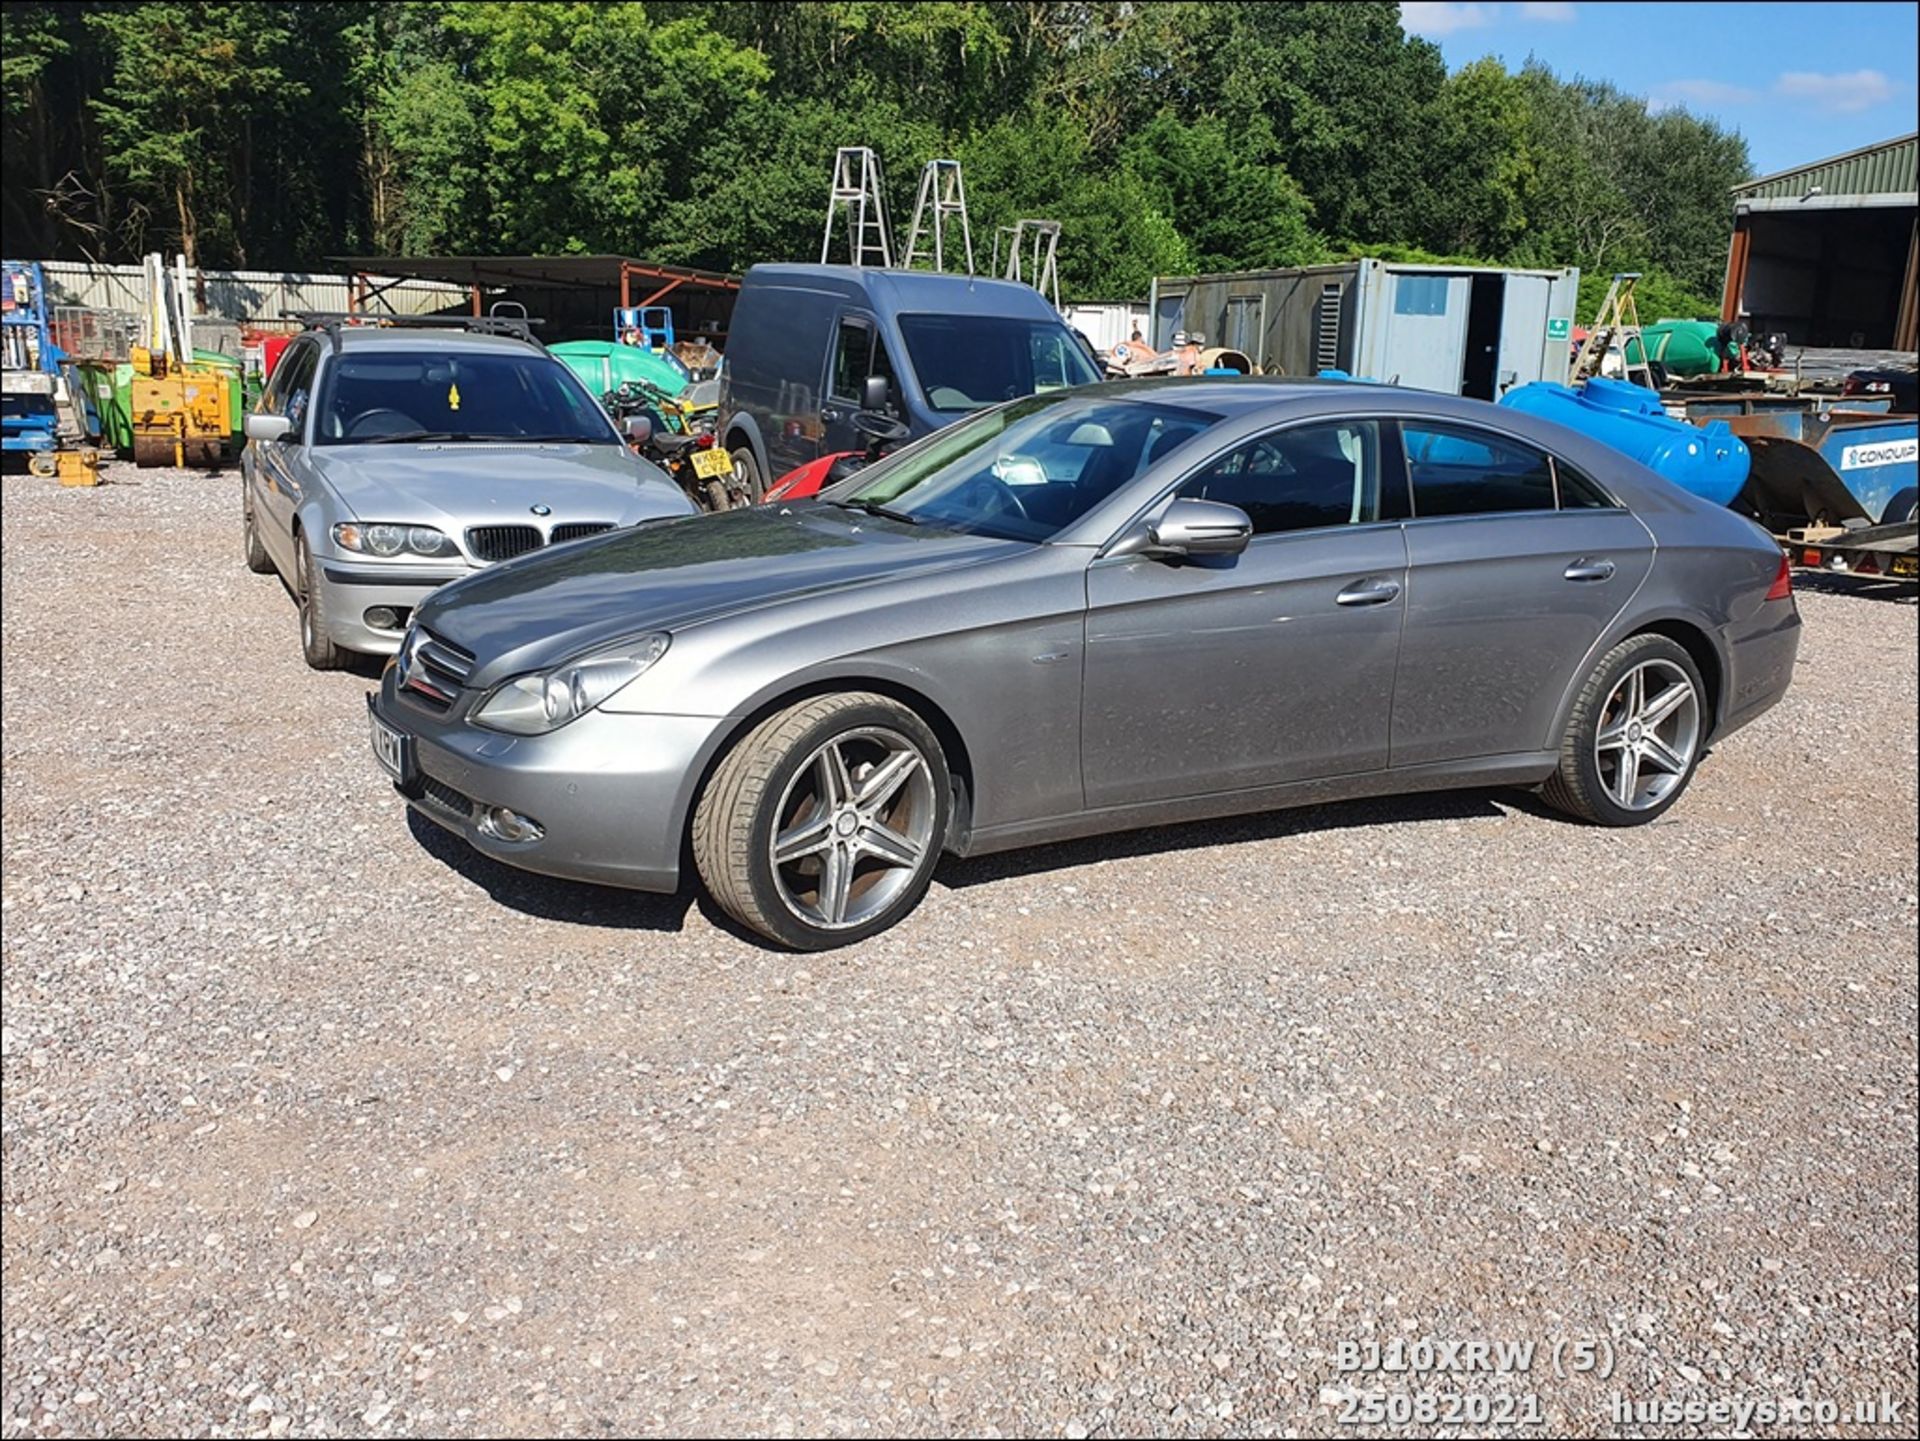 10/10 MERCEDES-BENZ CLS350 GRAND EDIT-N CDI A - 2987cc 2dr Coupe (Silver) - Image 6 of 18